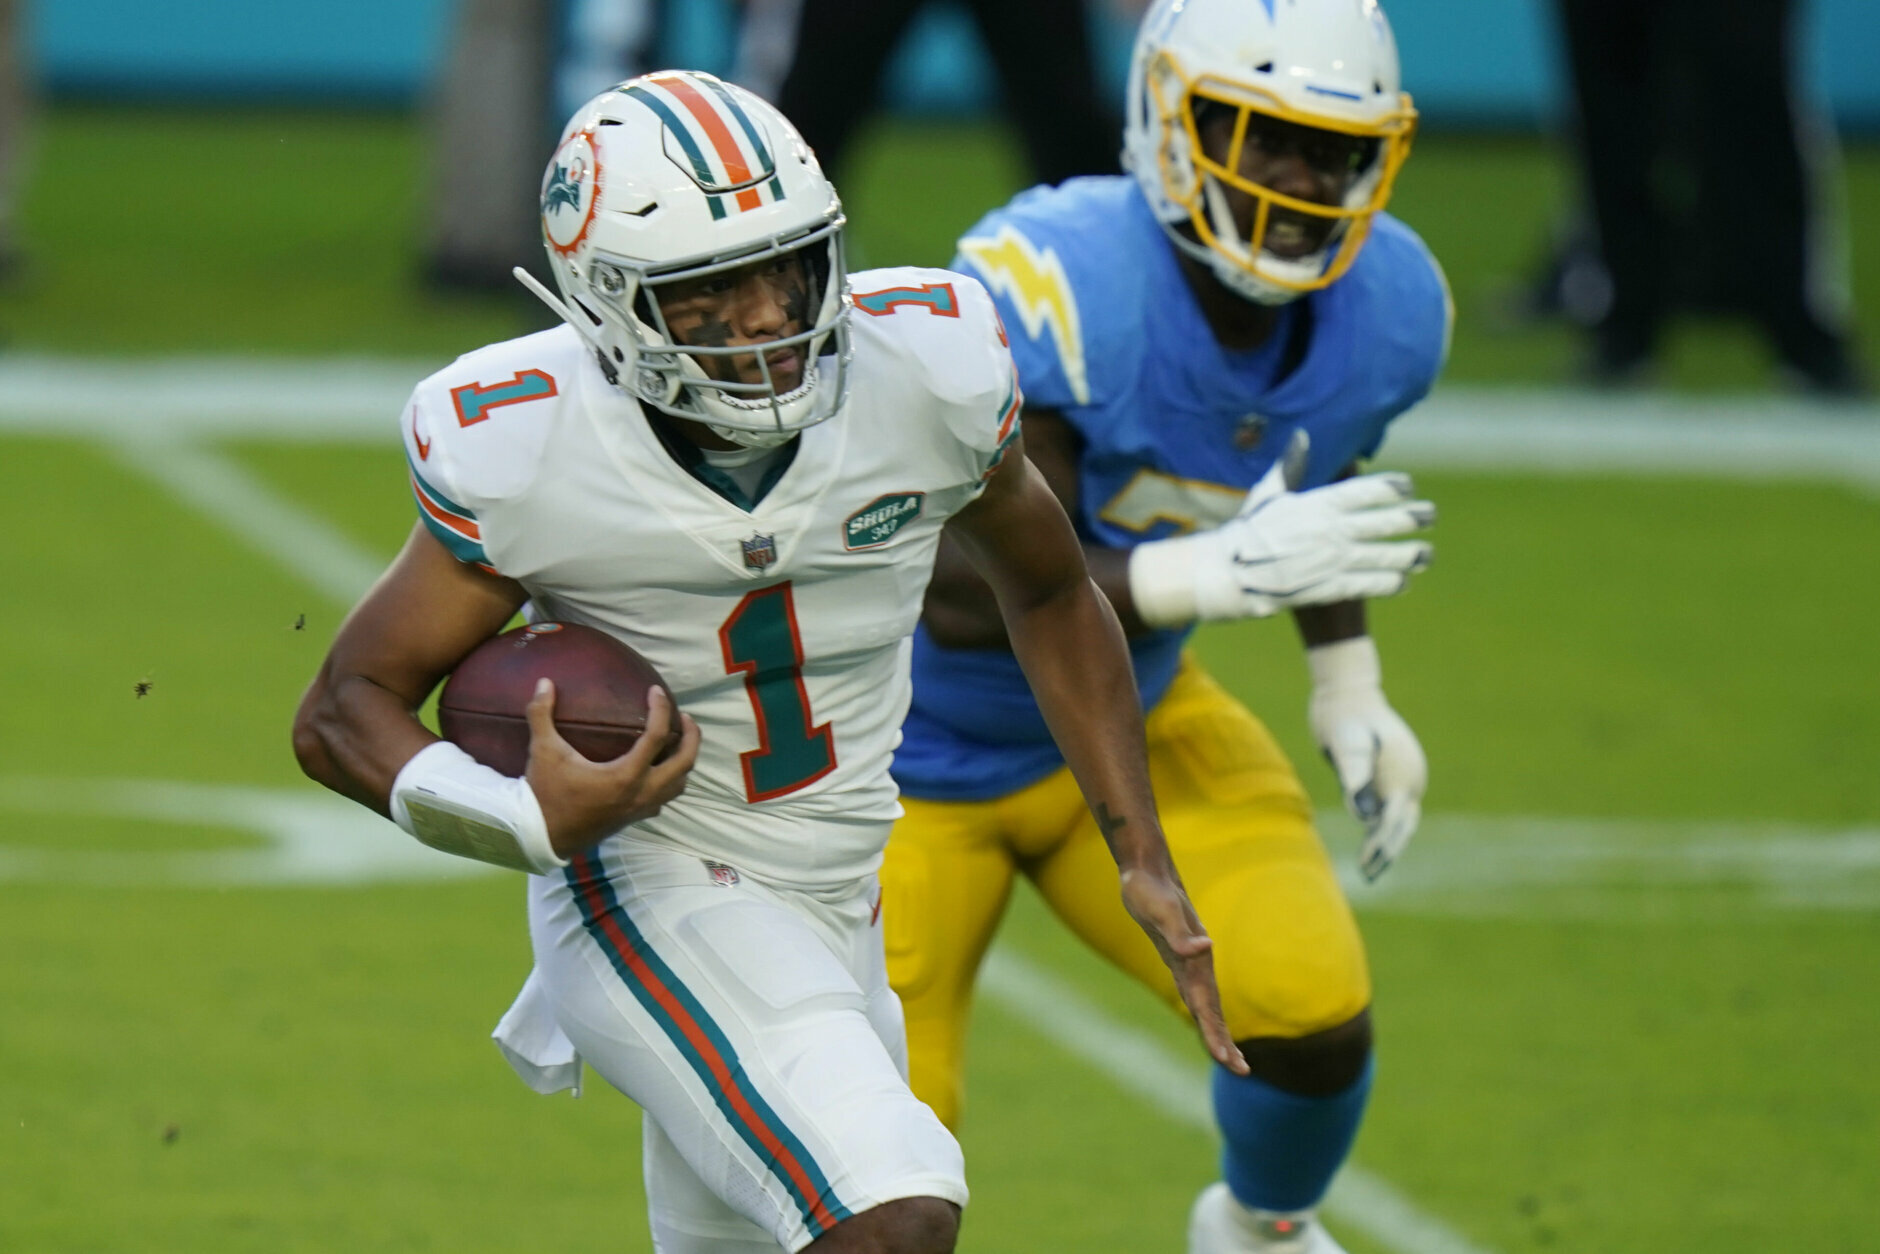 <p><b><i>Chargers 21</i></b><br />
<b><i>Dolphins 29</i></b></p>
<p>First, count me among those who want to see <a href="https://profootballtalk.nbcsports.com/2020/11/13/dolphins-throwbacks-could-eventually-become-their-permanent-uniforms/">Miami make the throwback uniforms the everyday unis</a>. Clean, classic, beautiful — just like the Dolphins sitting at 6-3 and off to their best start in 19 years.</p>
<p>Even as the Chargers are <a href="https://www.latimes.com/sports/chargers/story/2020-11-09/chargers-anthony-lynn">losing in every way possible</a>, they won big by drafting Justin Herbert, the first QB in NFL history to throw multiple touchdowns in six straight games. He and Tua Tagovailoa, whose five touchdowns are the third-most by a quarterback without an interception in his first three starts, seem <a href="https://www.youtube.com/watch?v=3dtFIjaD5hA" target="_blank" rel="noopener">destined to do this forever</a>.</p>
